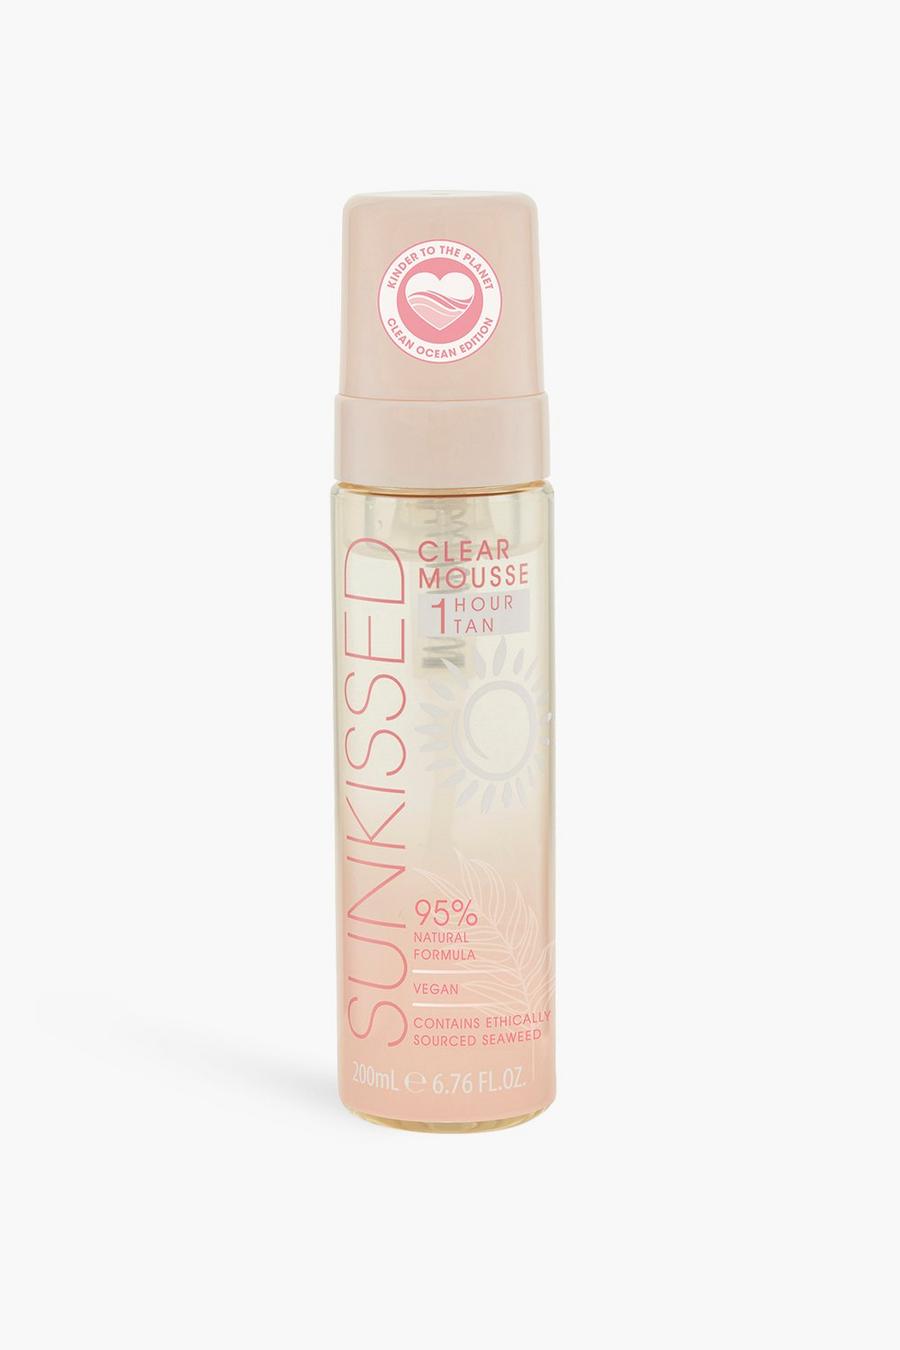 Sunkissed Vegan Clear Mousse 1 Hour Tan